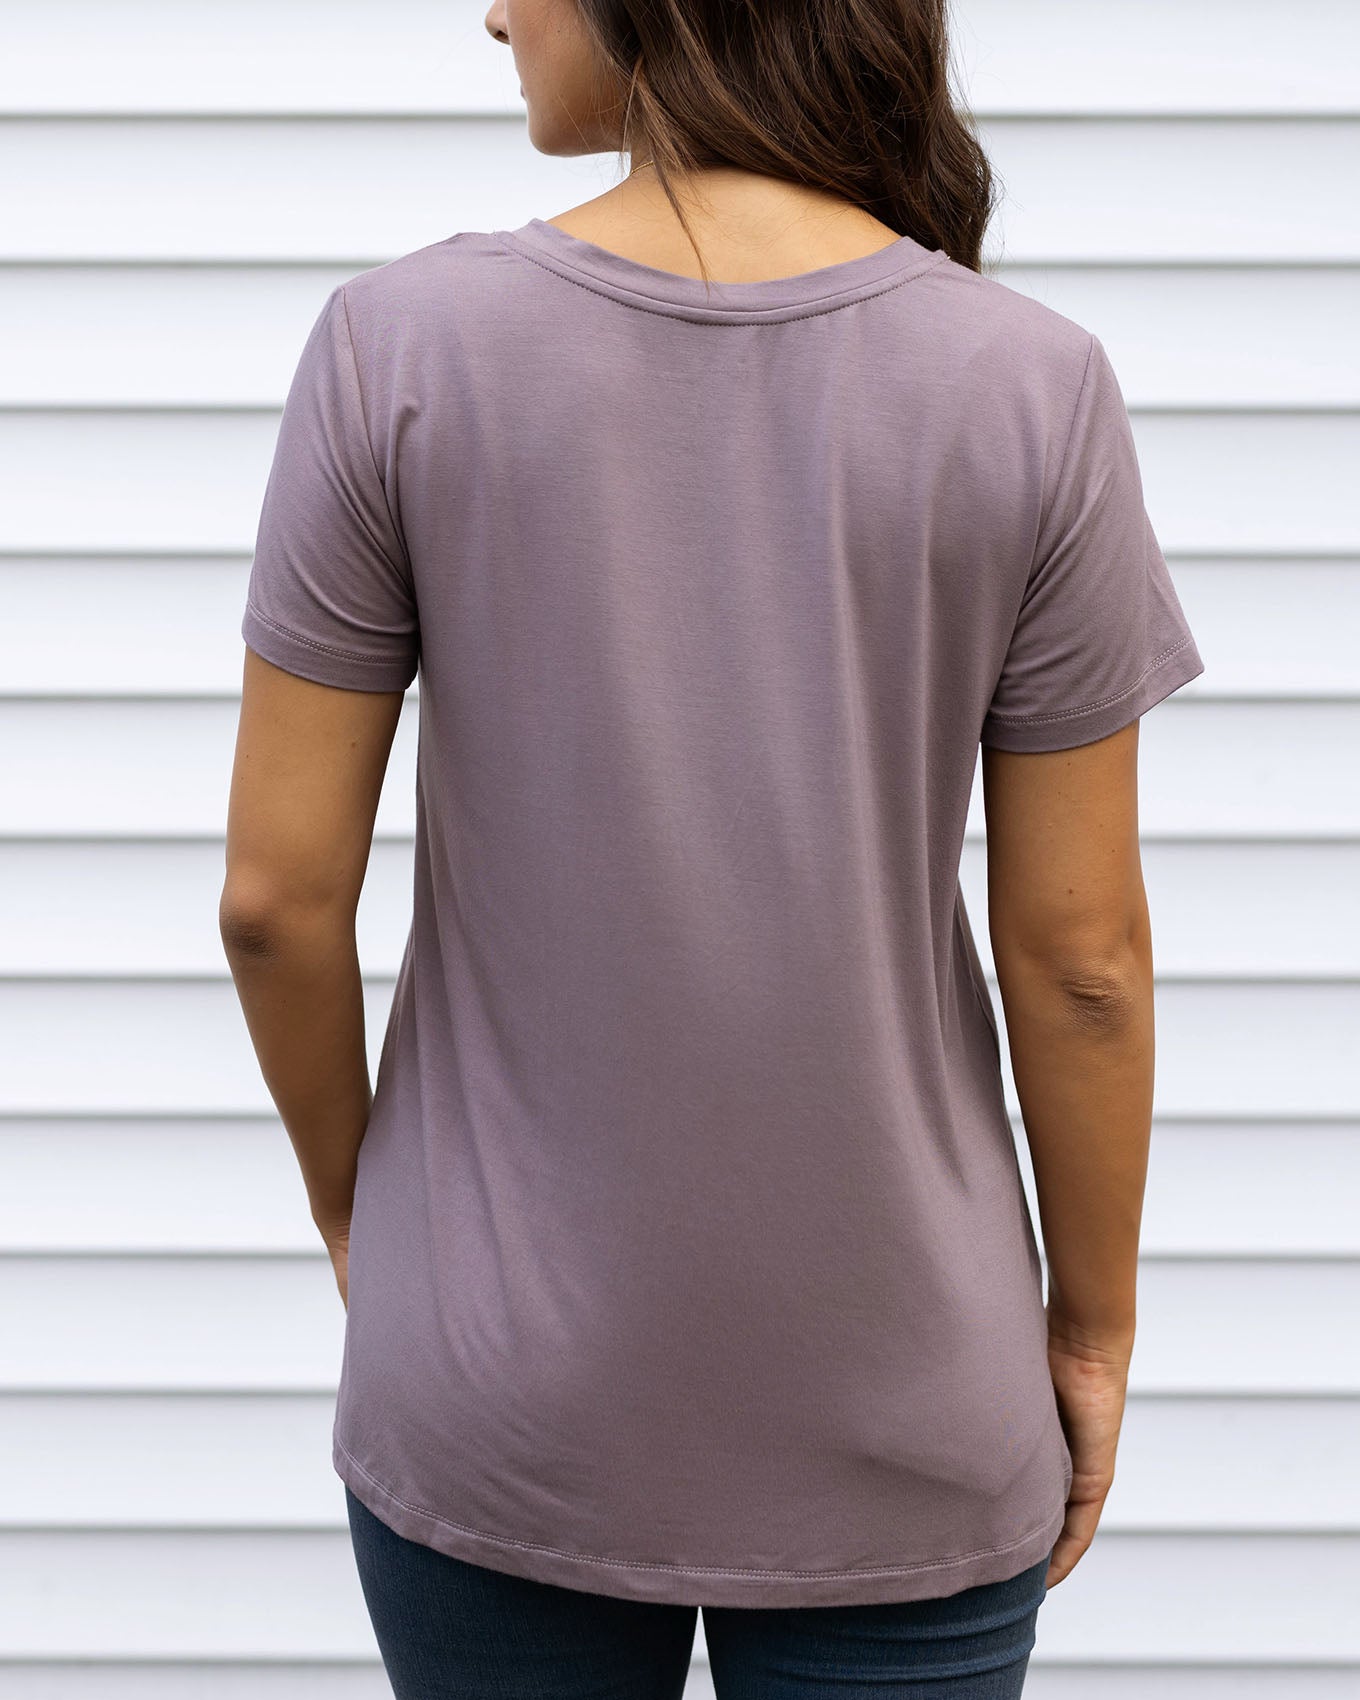 back view of purple v-neck tee